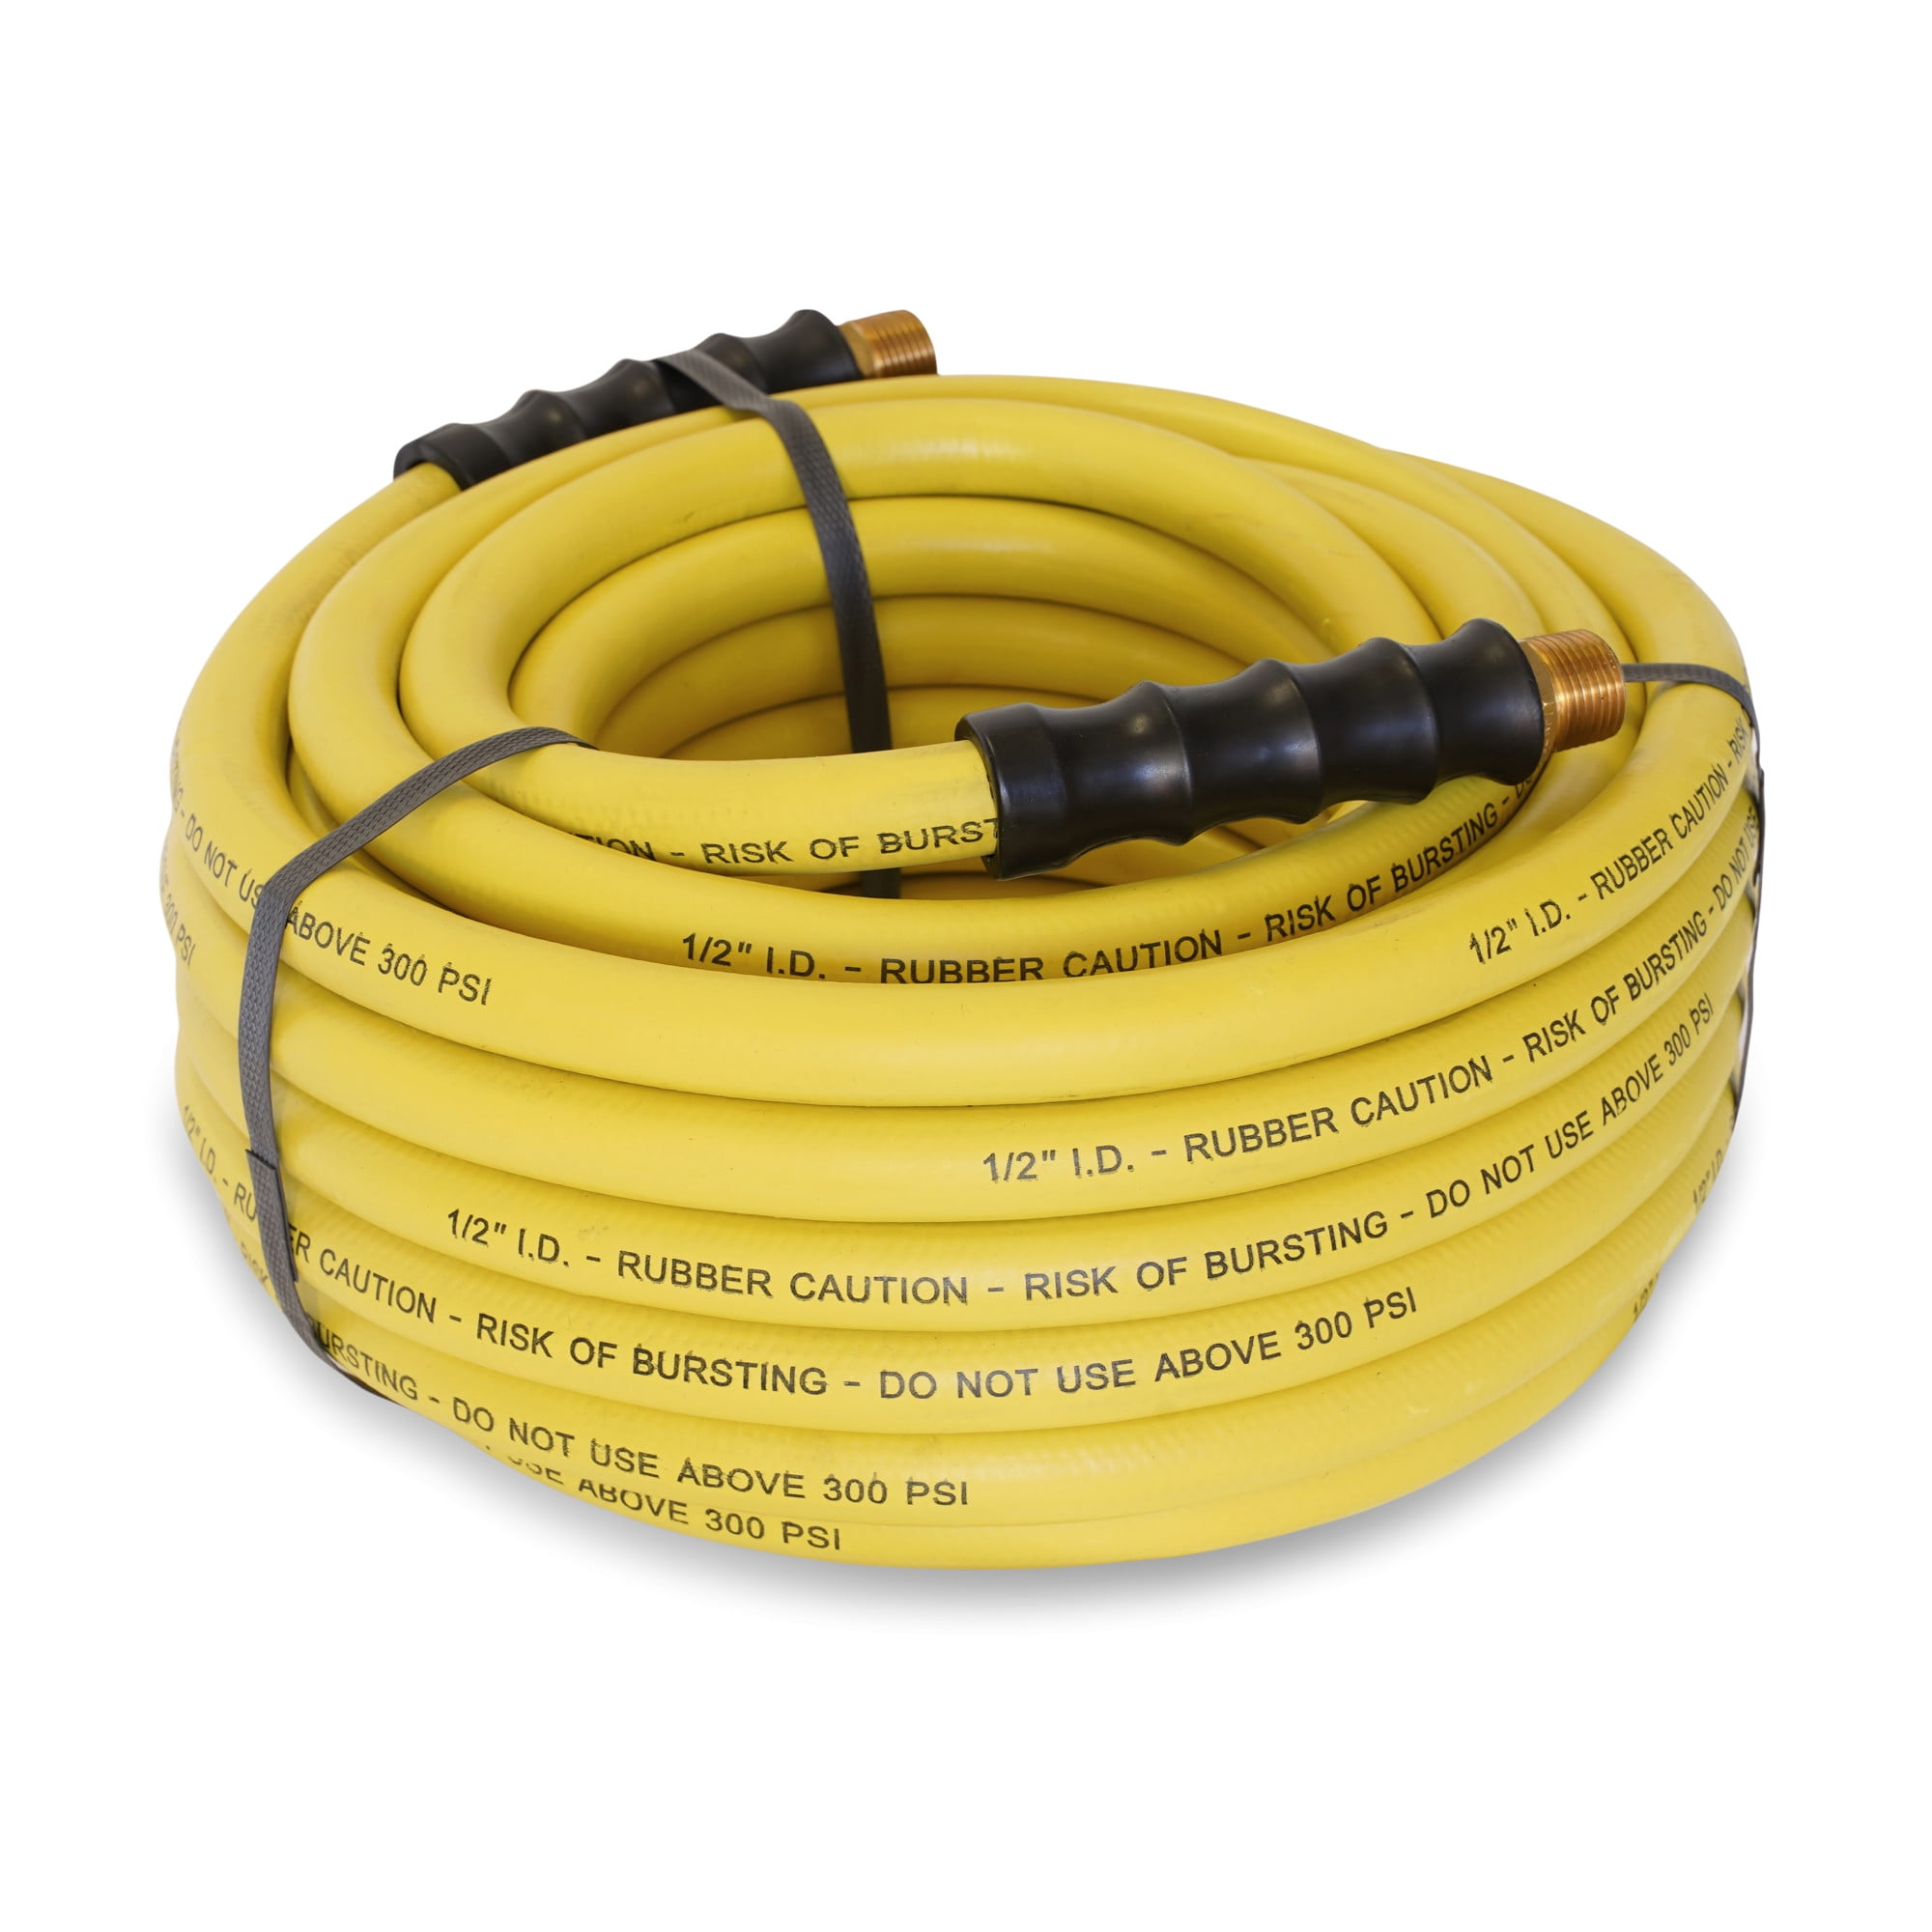 STEELMAN 96846-IND 50-Foot Long Air Rubber Brass 1/2-Inch NPT Hose ID / Reel Water Hose with Fittings 1/2-Inch Replacement Yellow